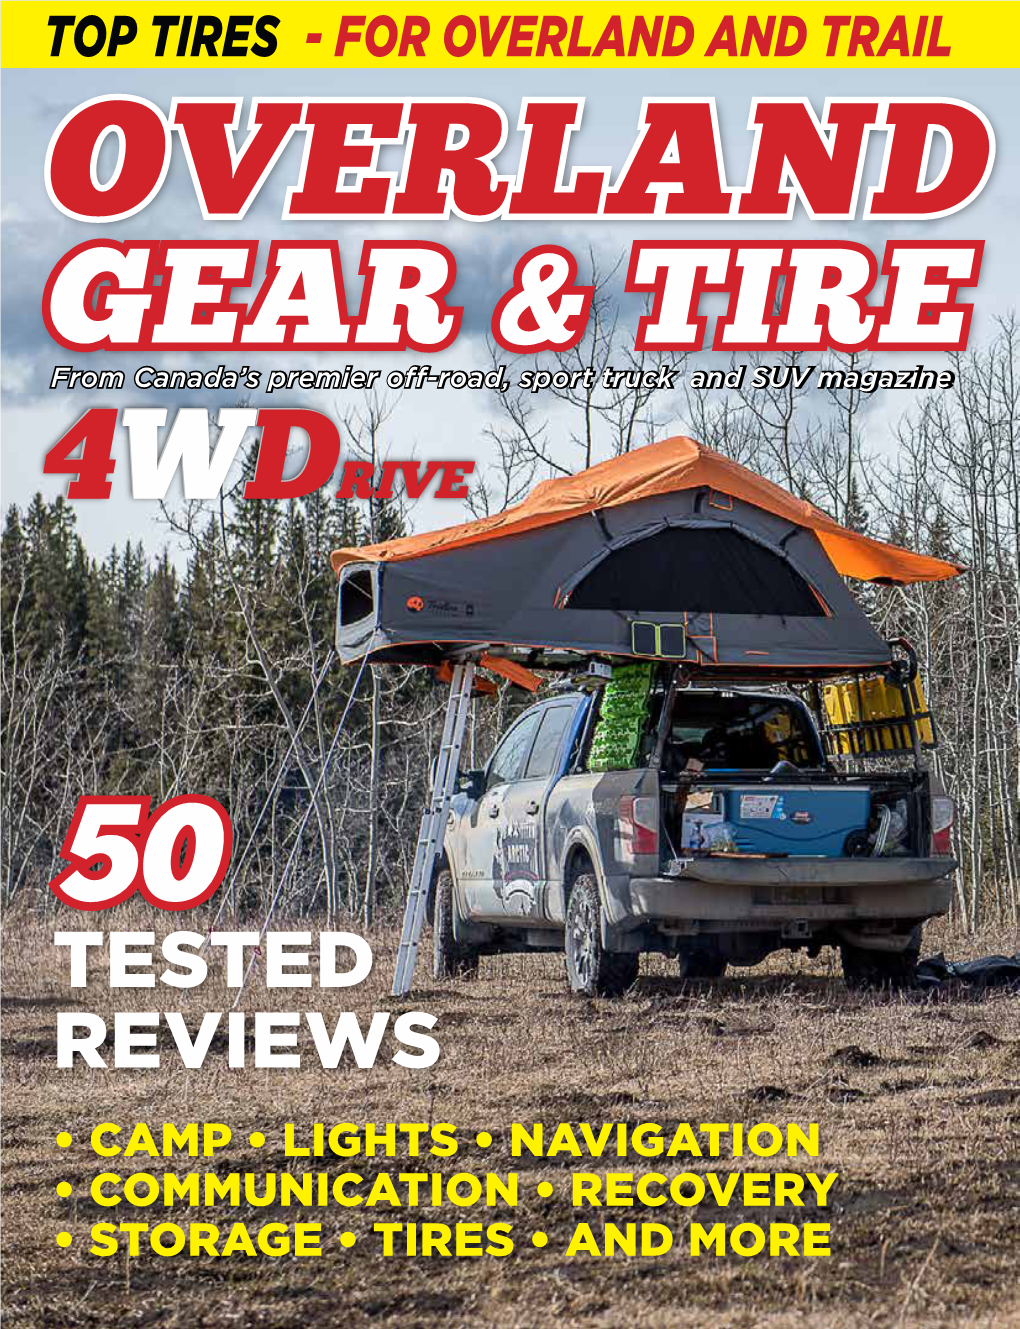 Tested Reviews • Camp • Lights • Navigation • Communication • Recovery • Storage • Tires • and More T I R E T E R W I N S T E D Y T E F U L L